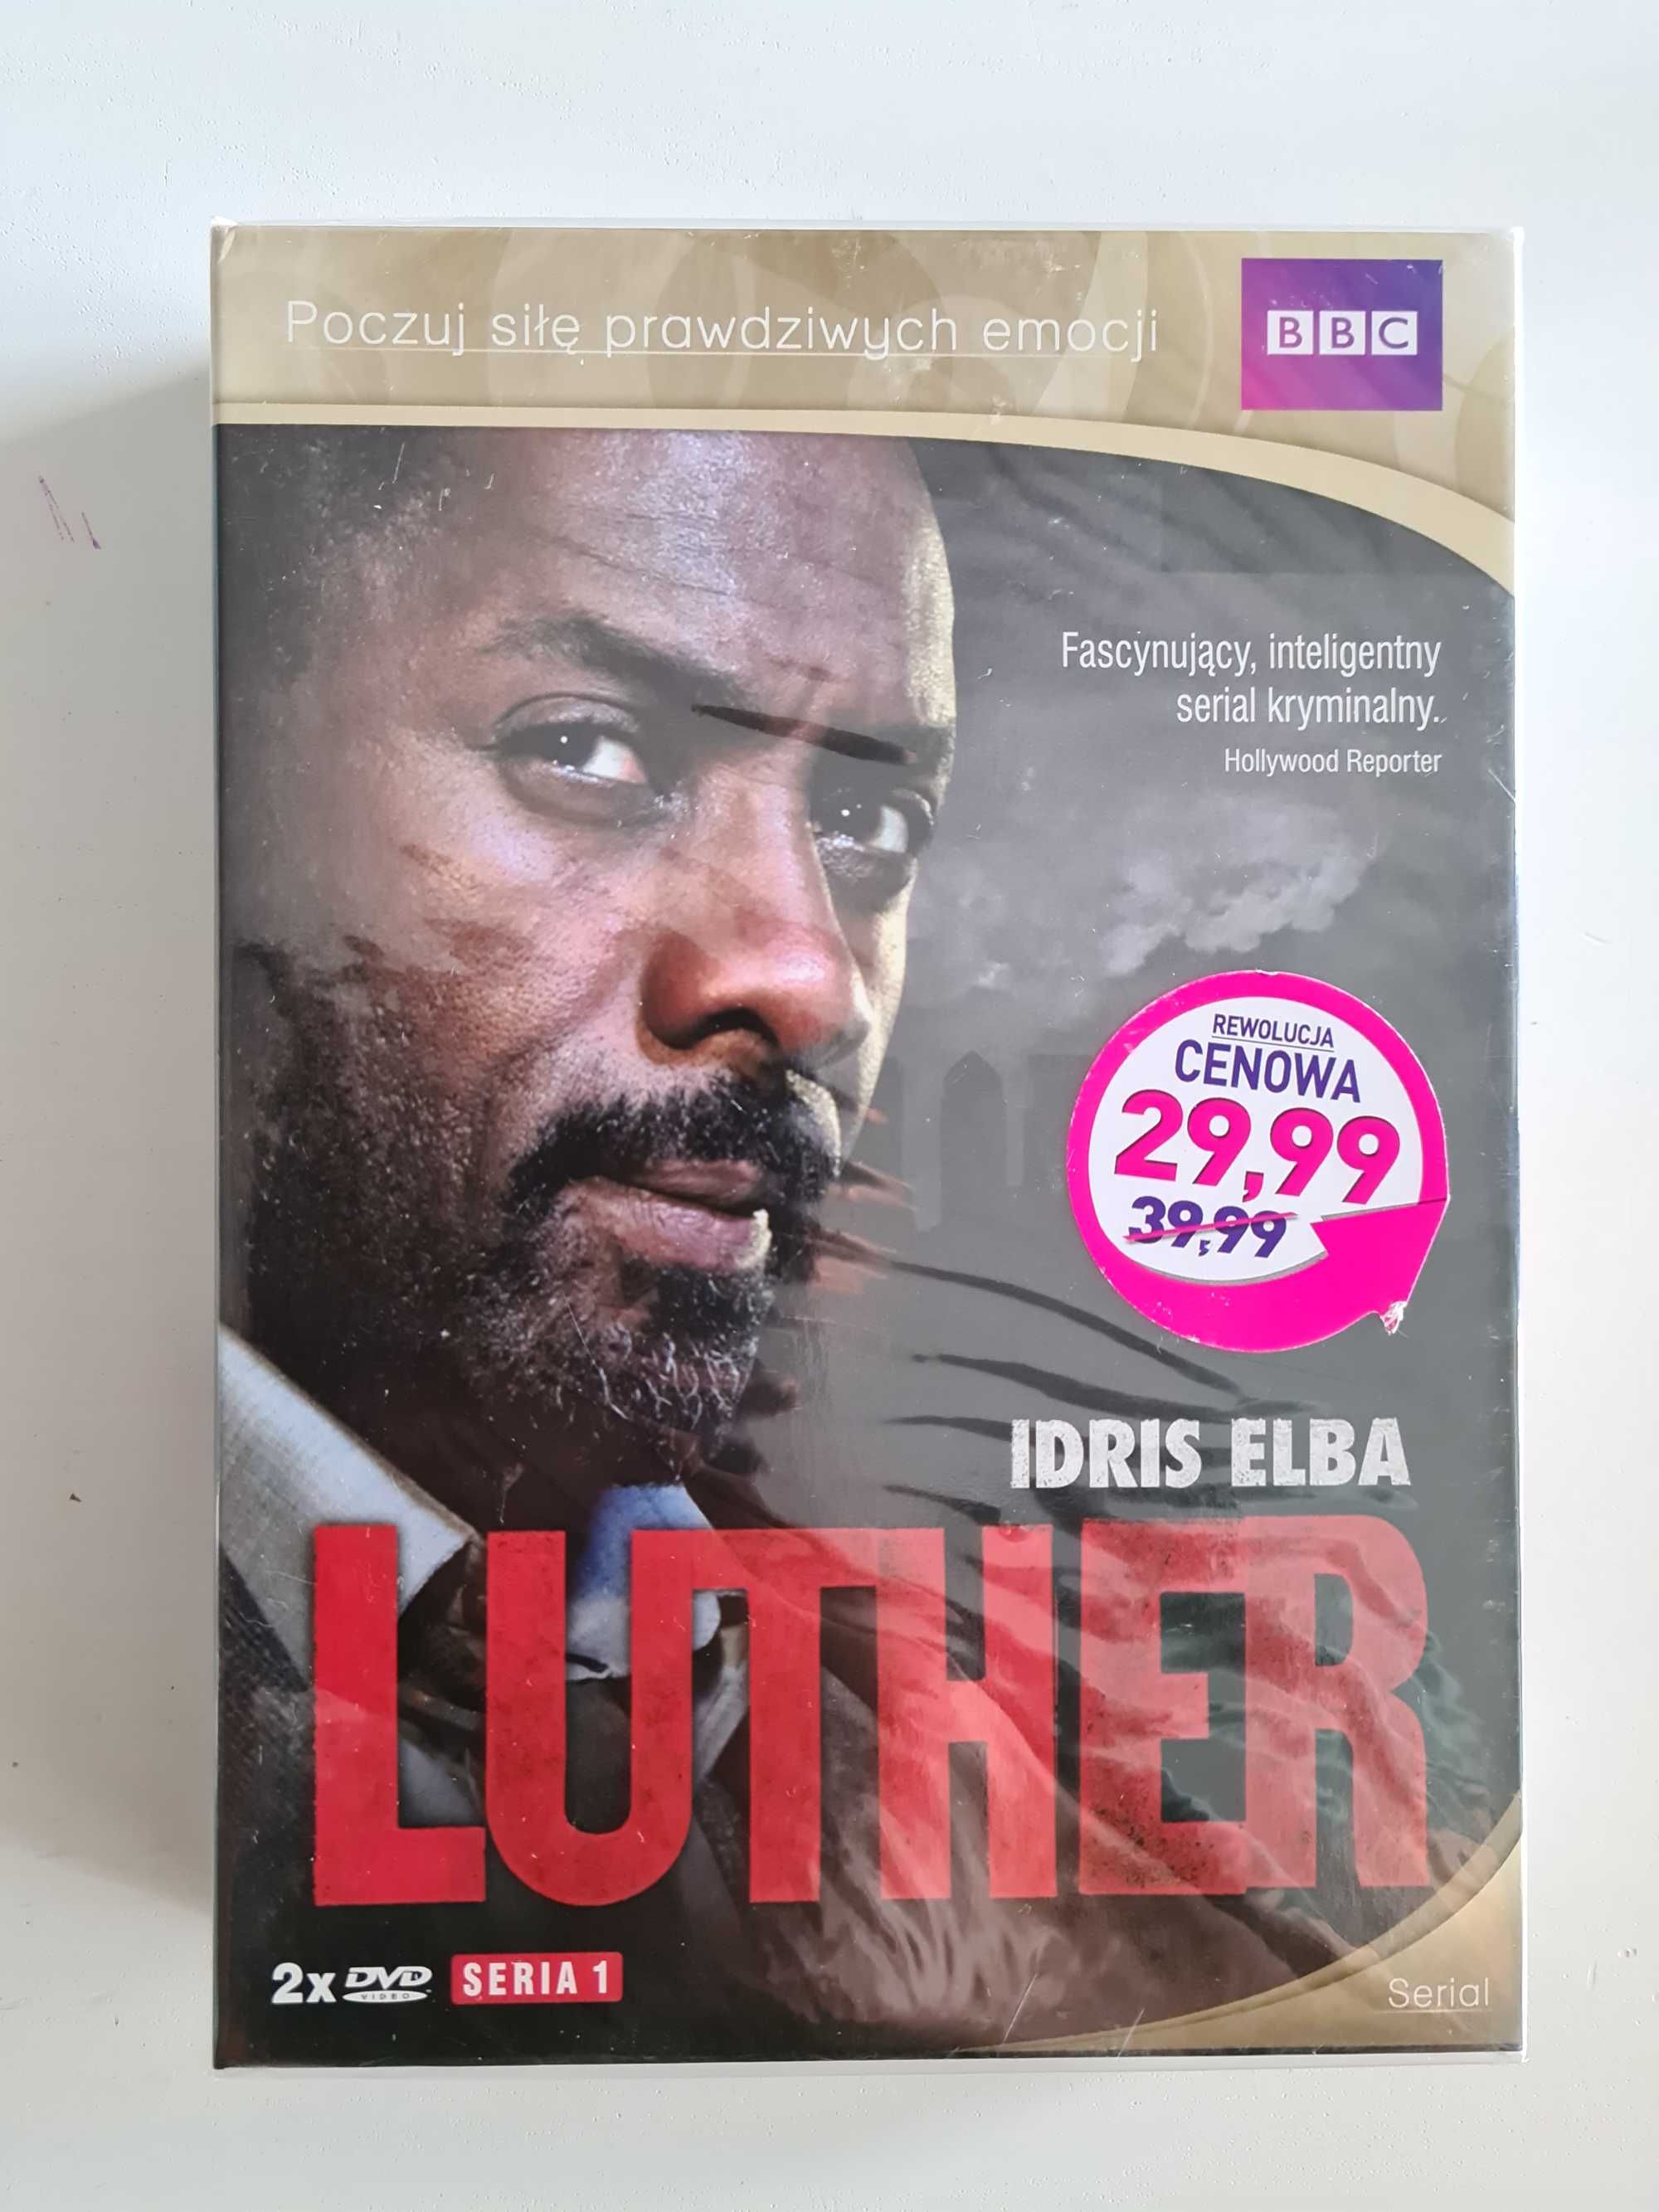 LUTHER Seria 1 nowy 2xDVD